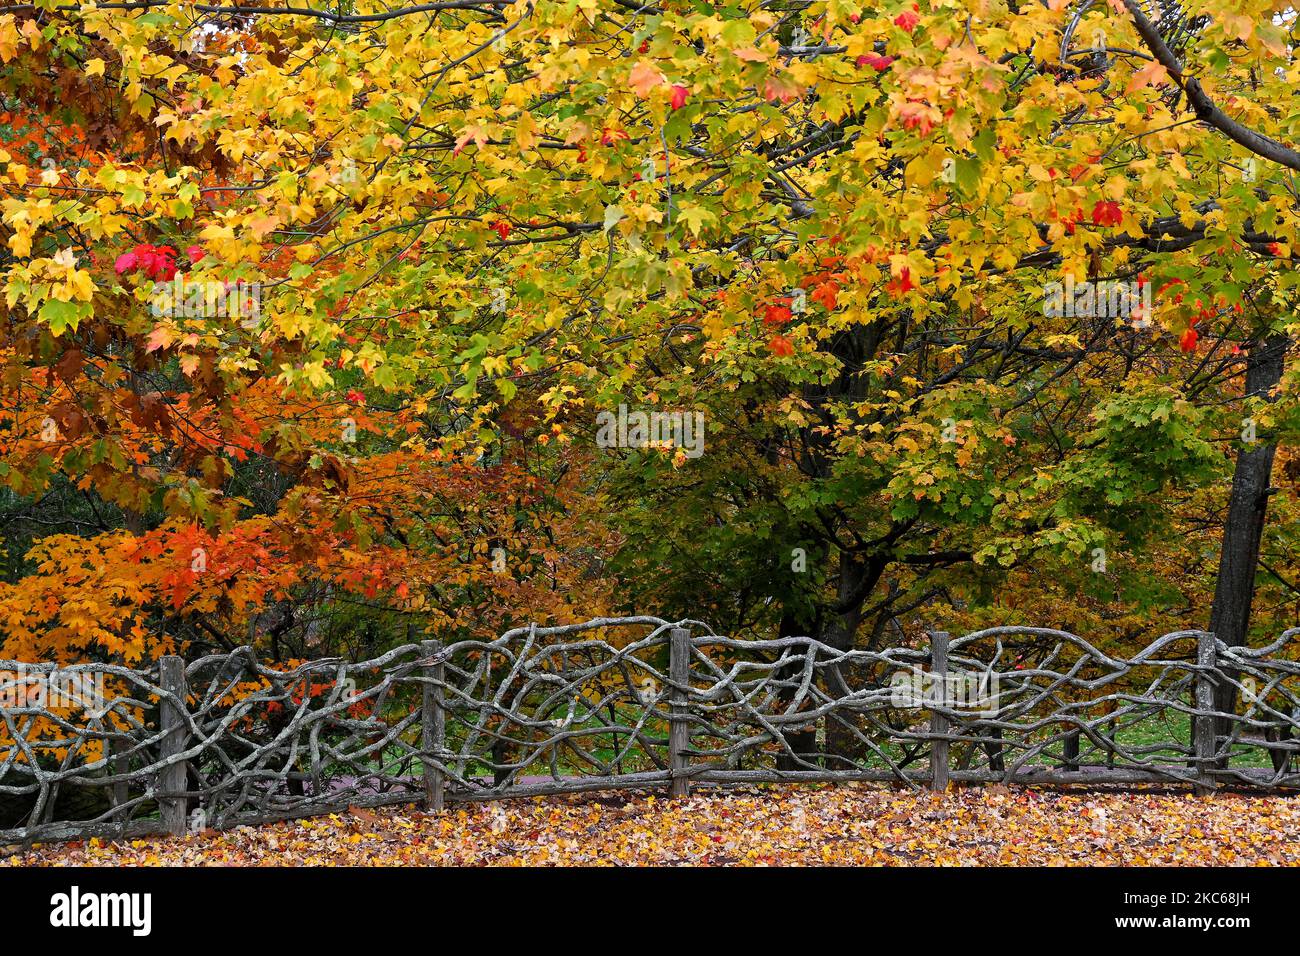 Beautiful trees in fall foliage and a rustic fence made of interwoven tree branches. Stock Photo